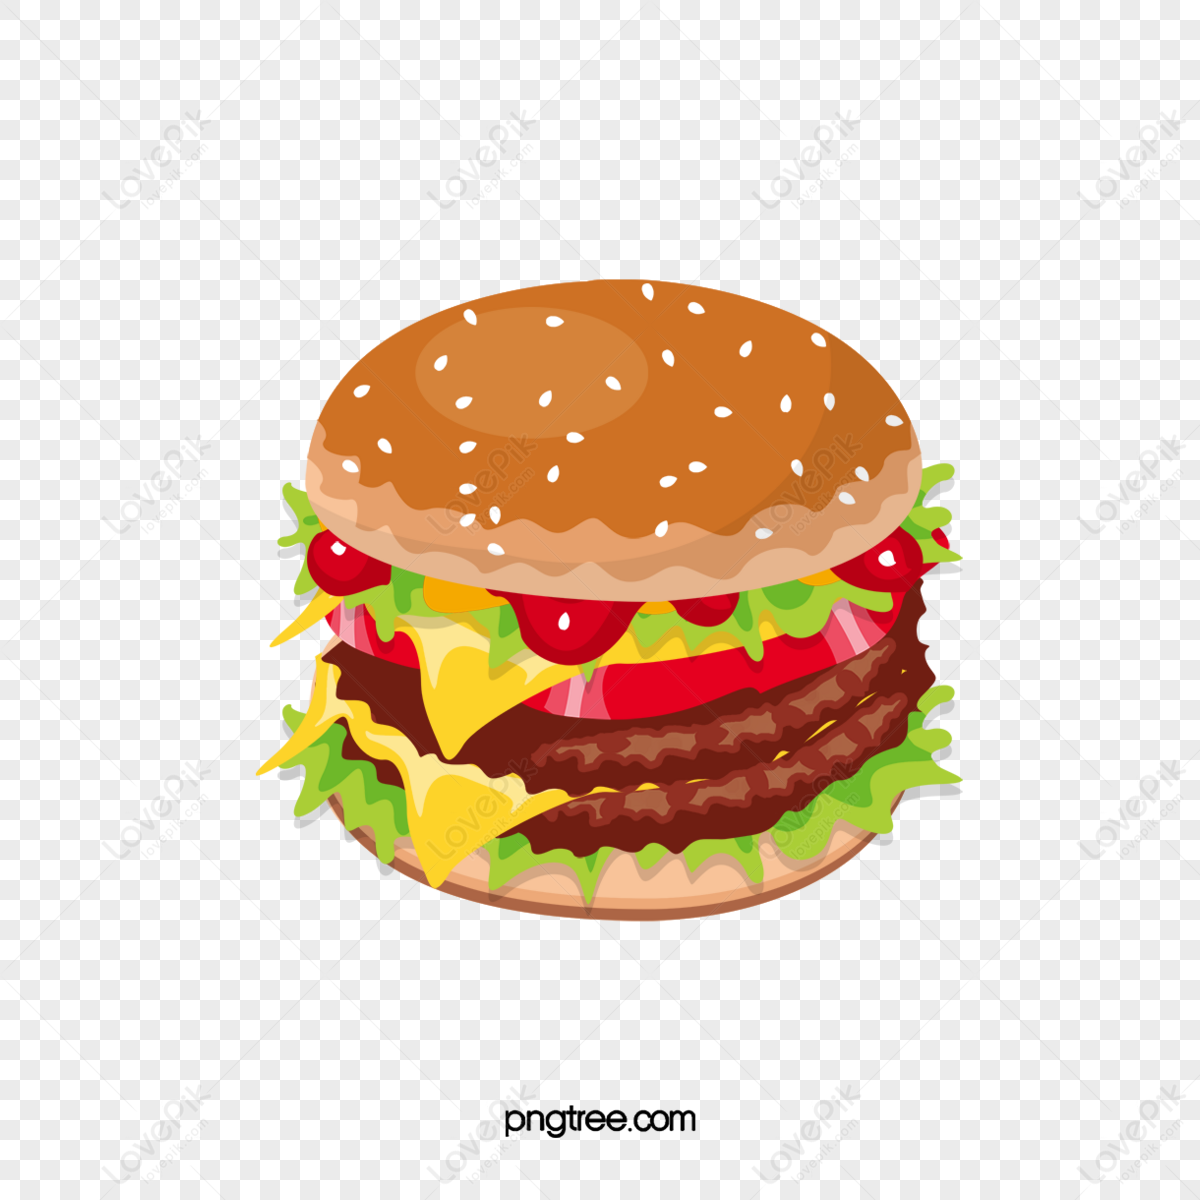 Burger Sticker PNG Images With Transparent Background